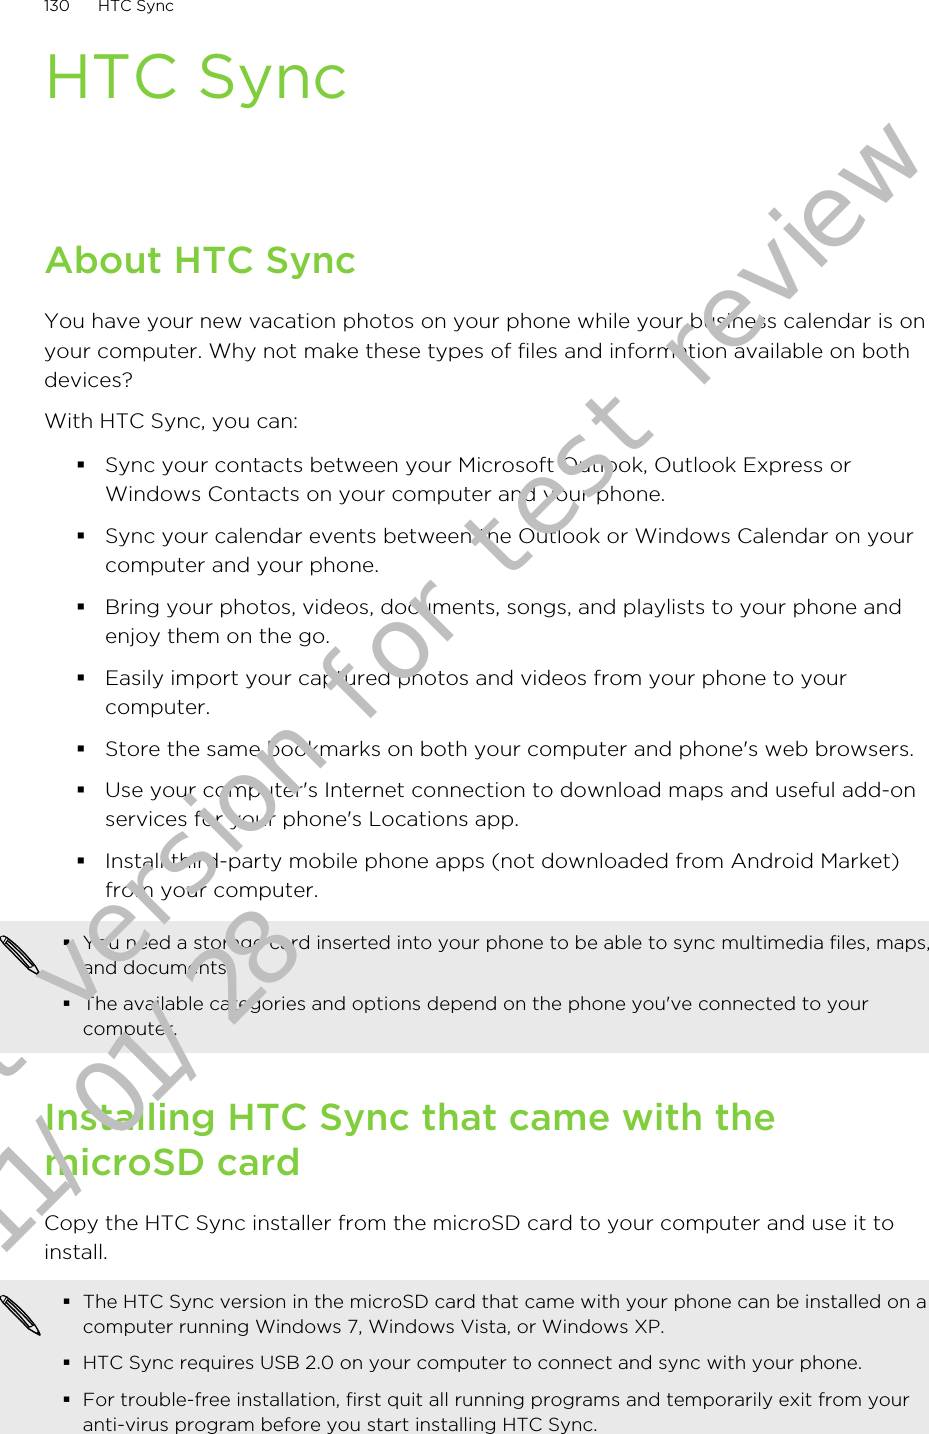 HTC SyncAbout HTC SyncYou have your new vacation photos on your phone while your business calendar is onyour computer. Why not make these types of files and information available on bothdevices?With HTC Sync, you can:§Sync your contacts between your Microsoft Outlook, Outlook Express orWindows Contacts on your computer and your phone.§Sync your calendar events between the Outlook or Windows Calendar on yourcomputer and your phone.§Bring your photos, videos, documents, songs, and playlists to your phone andenjoy them on the go.§Easily import your captured photos and videos from your phone to yourcomputer.§Store the same bookmarks on both your computer and phone&apos;s web browsers.§Use your computer&apos;s Internet connection to download maps and useful add-onservices for your phone&apos;s Locations app.§Install third-party mobile phone apps (not downloaded from Android Market)from your computer.§You need a storage card inserted into your phone to be able to sync multimedia files, maps,and documents.§The available categories and options depend on the phone you&apos;ve connected to yourcomputer.Installing HTC Sync that came with themicroSD cardCopy the HTC Sync installer from the microSD card to your computer and use it toinstall.§The HTC Sync version in the microSD card that came with your phone can be installed on acomputer running Windows 7, Windows Vista, or Windows XP.§HTC Sync requires USB 2.0 on your computer to connect and sync with your phone.§For trouble-free installation, first quit all running programs and temporarily exit from youranti-virus program before you start installing HTC Sync.130 HTC SyncDraft version for test review 2011/01/28 